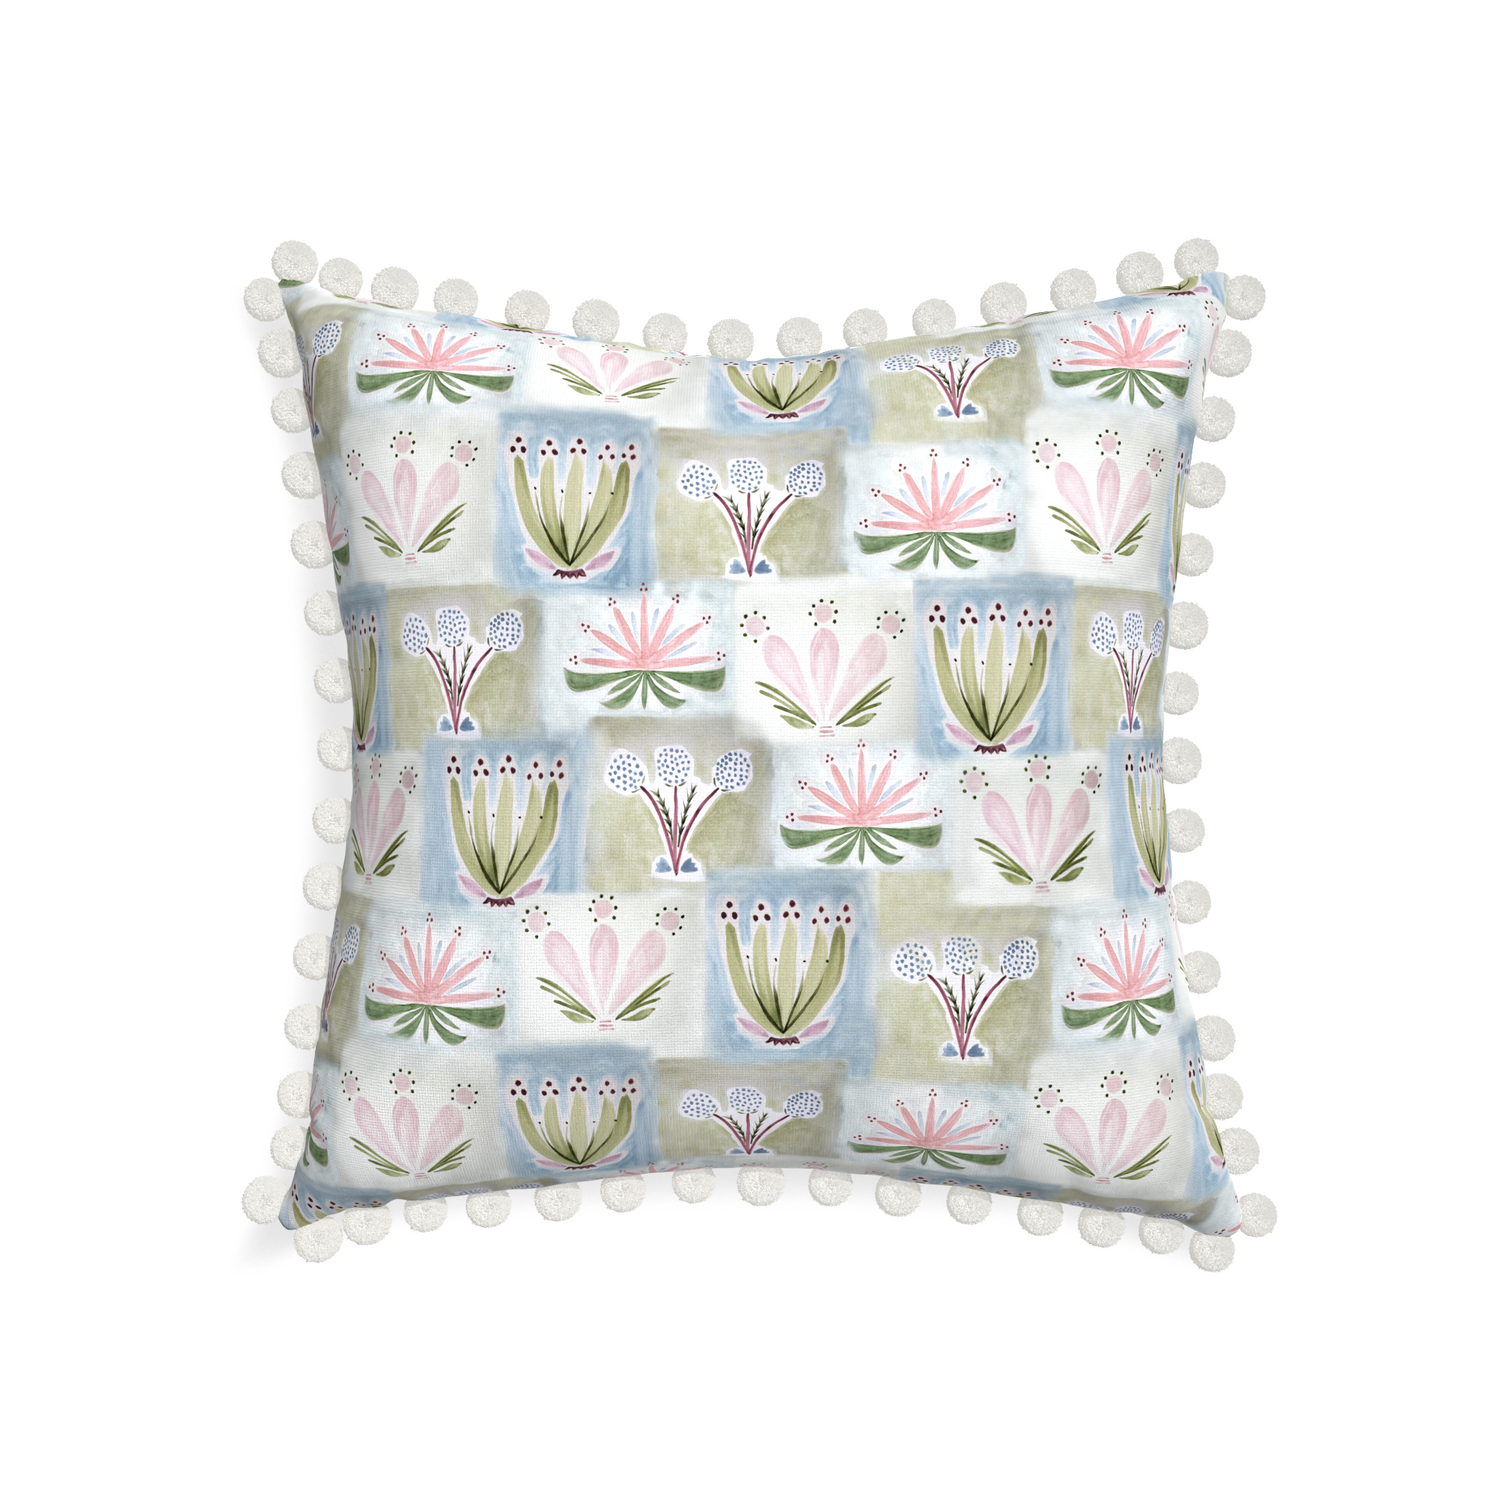 22-square harper custom hand-painted floralpillow with snow pom pom on white background